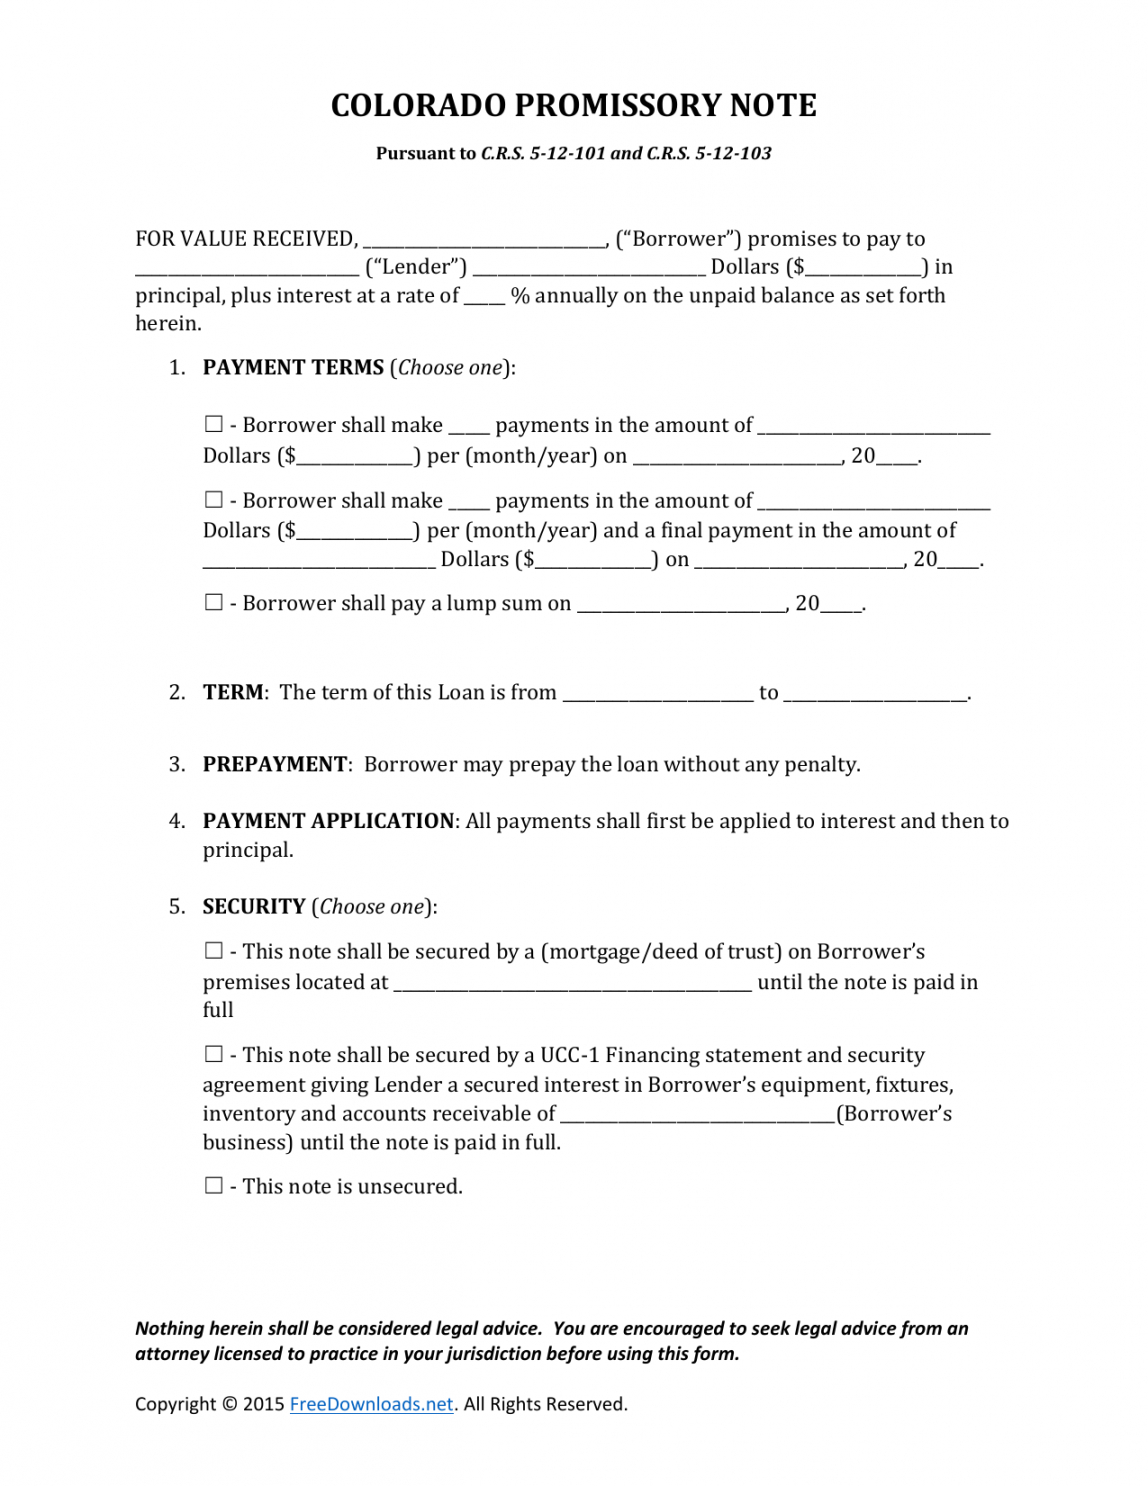 free download colorado promissory note form  pdf  rtf  word promissory note template colorado sample